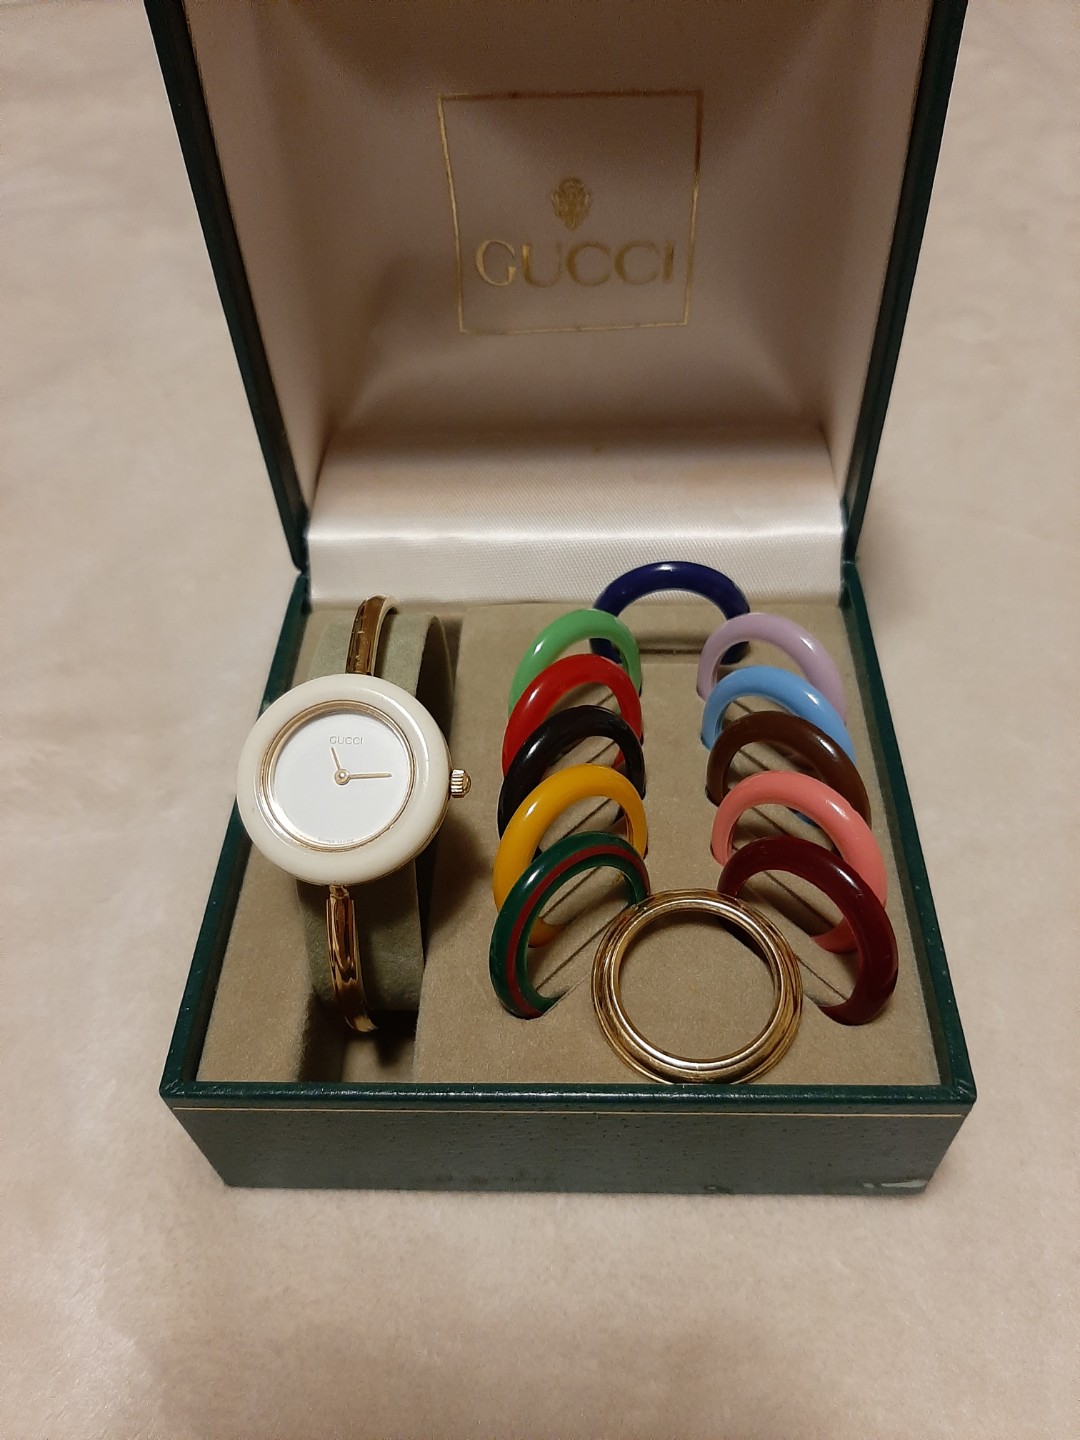 gucci watch with interchangeable bezels